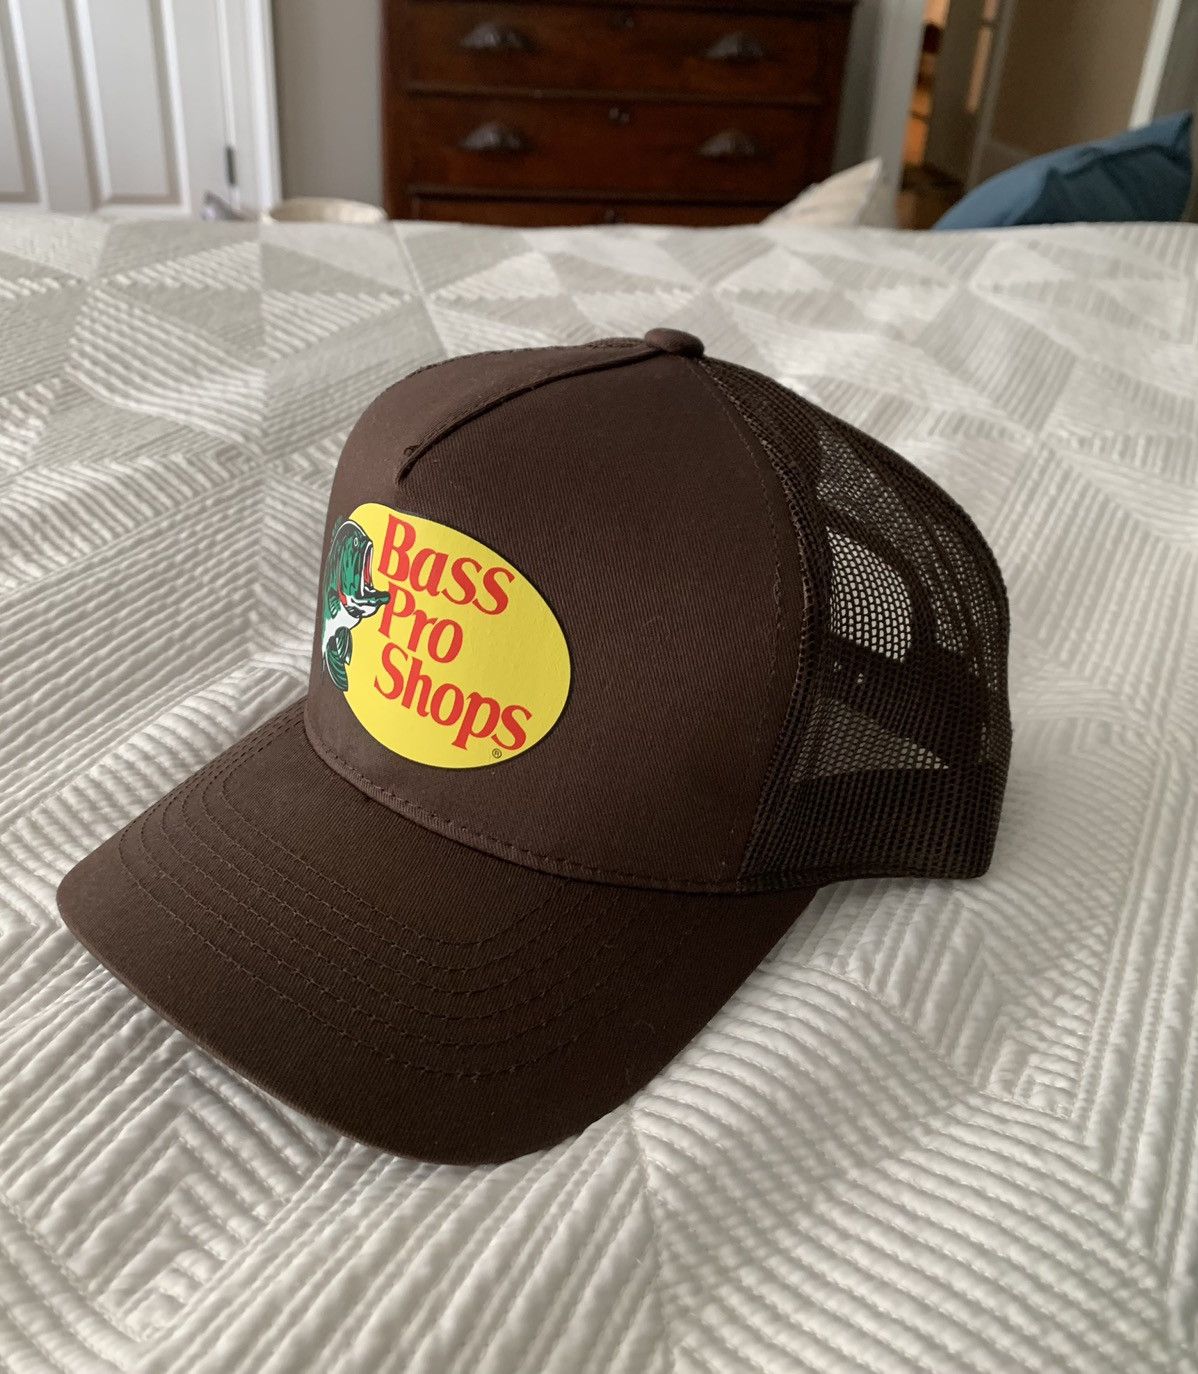 Everyone Is Wearing This Bass Pro Shops Hat—And It's Only $6